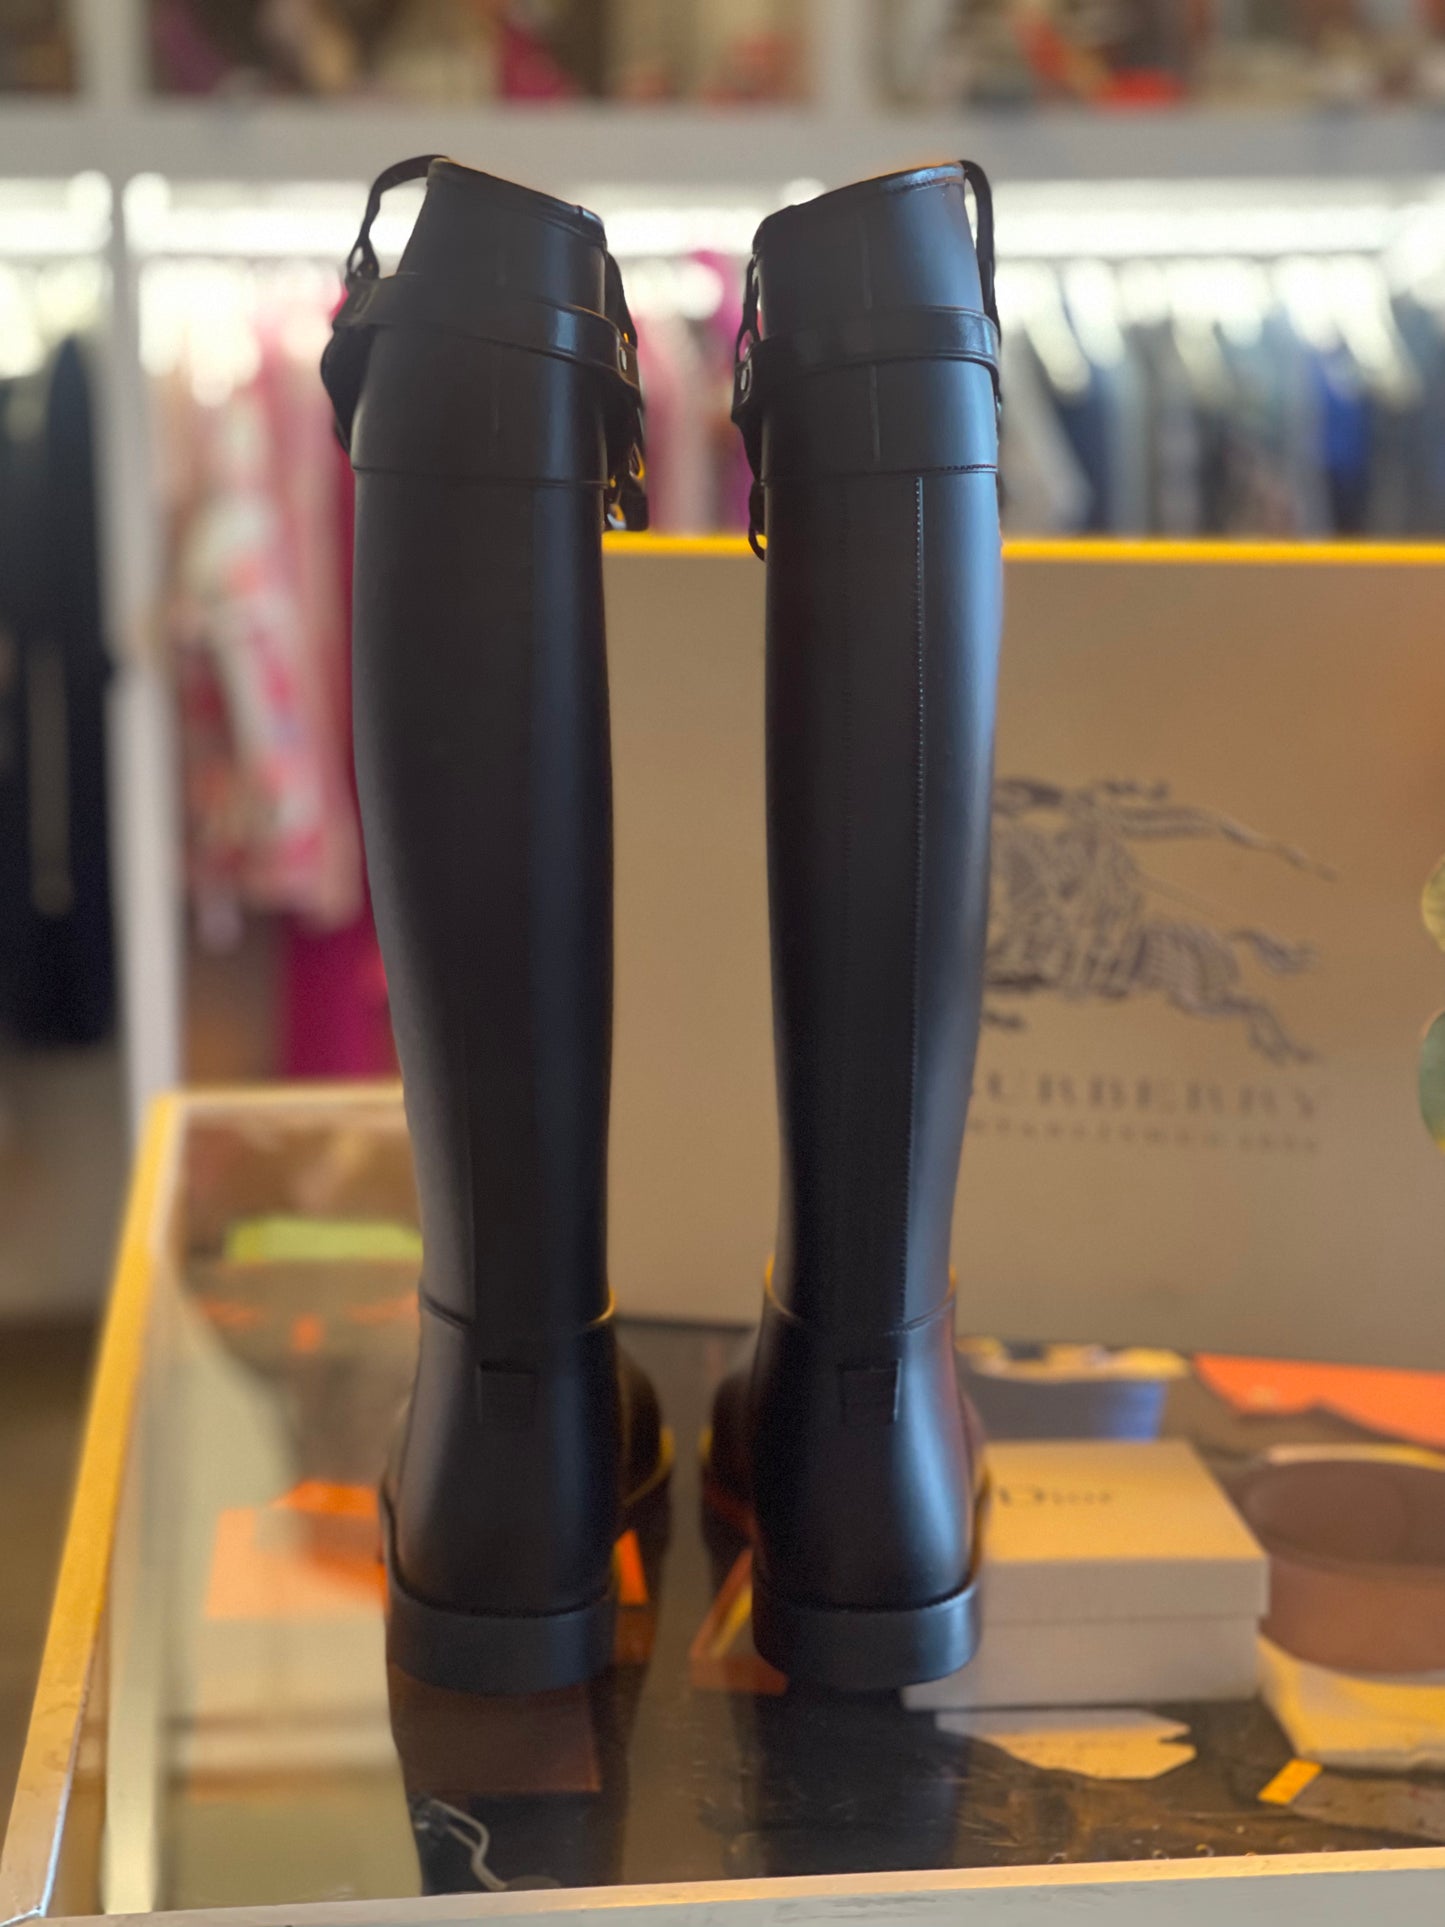 Burberry Rubber Boots - new